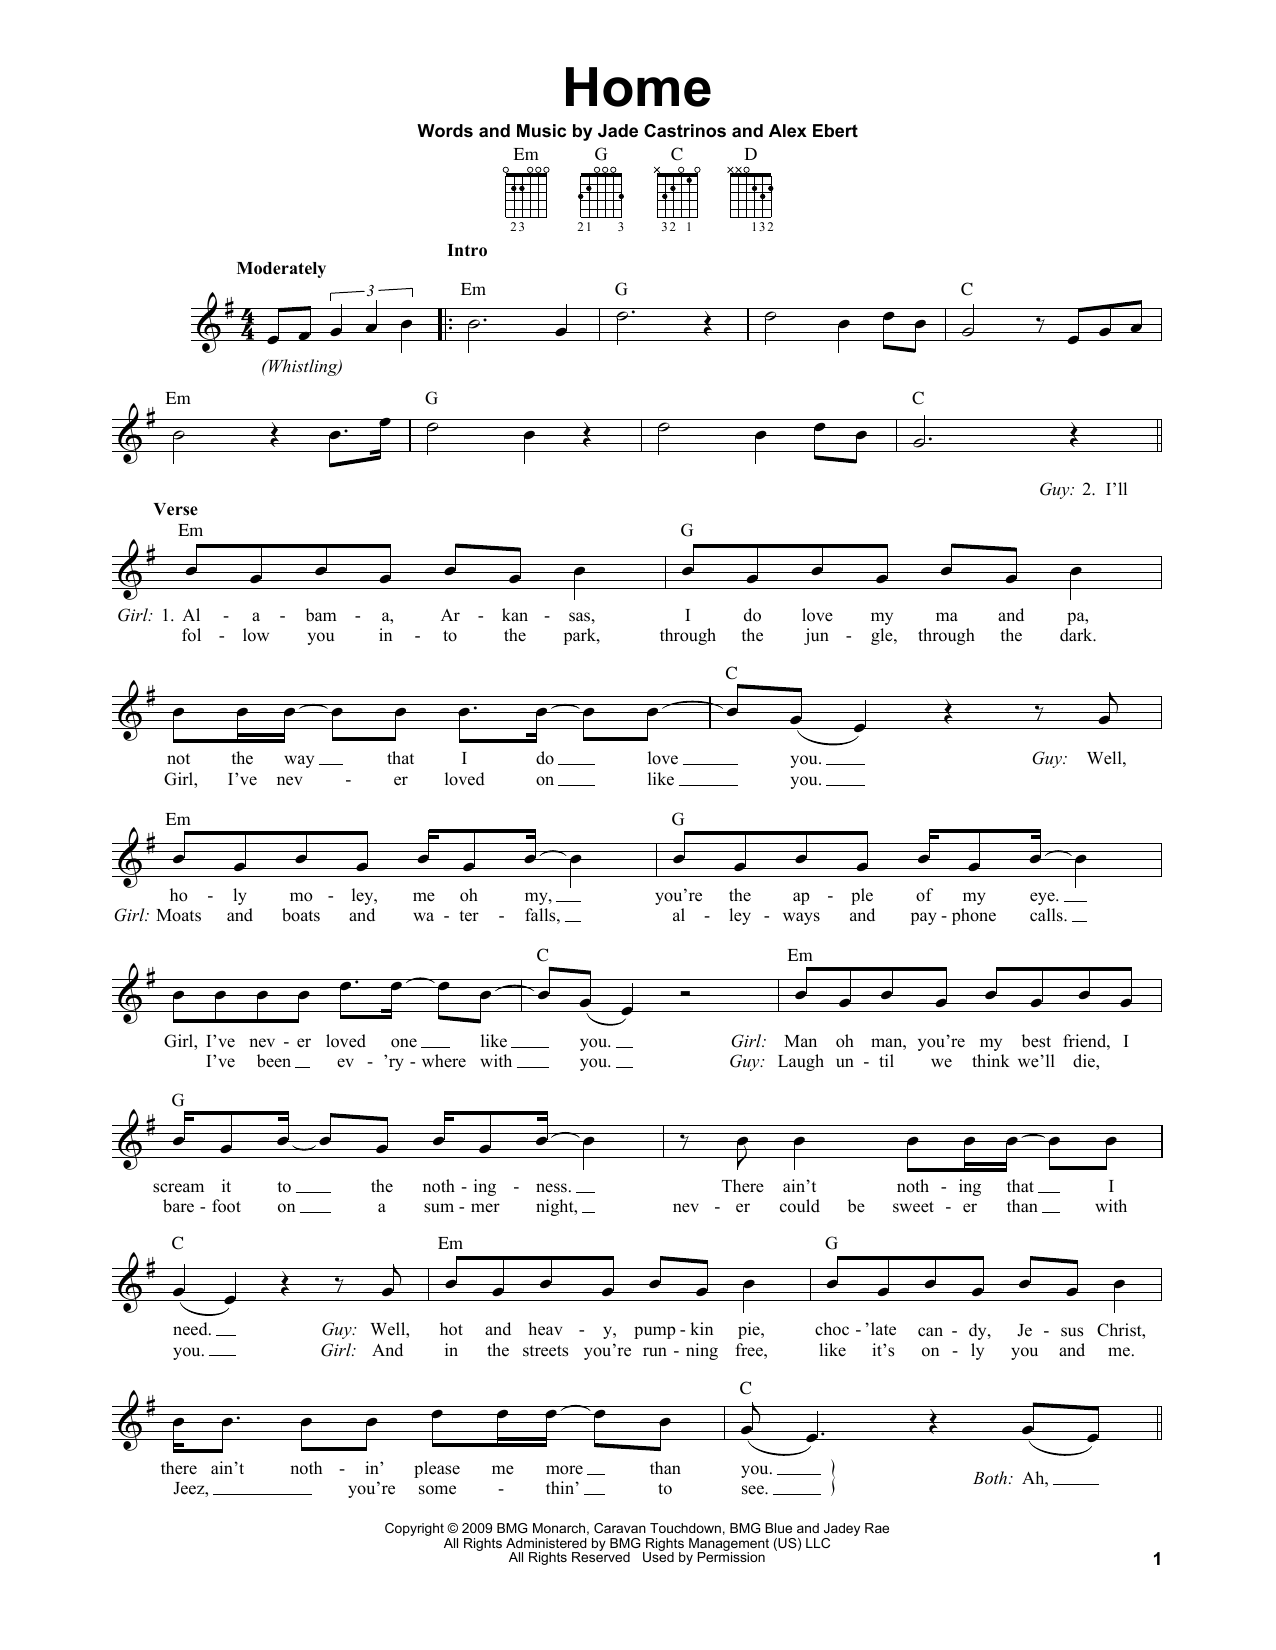 Download Edward Sharpe & the Magnetic Zeros Home Sheet Music